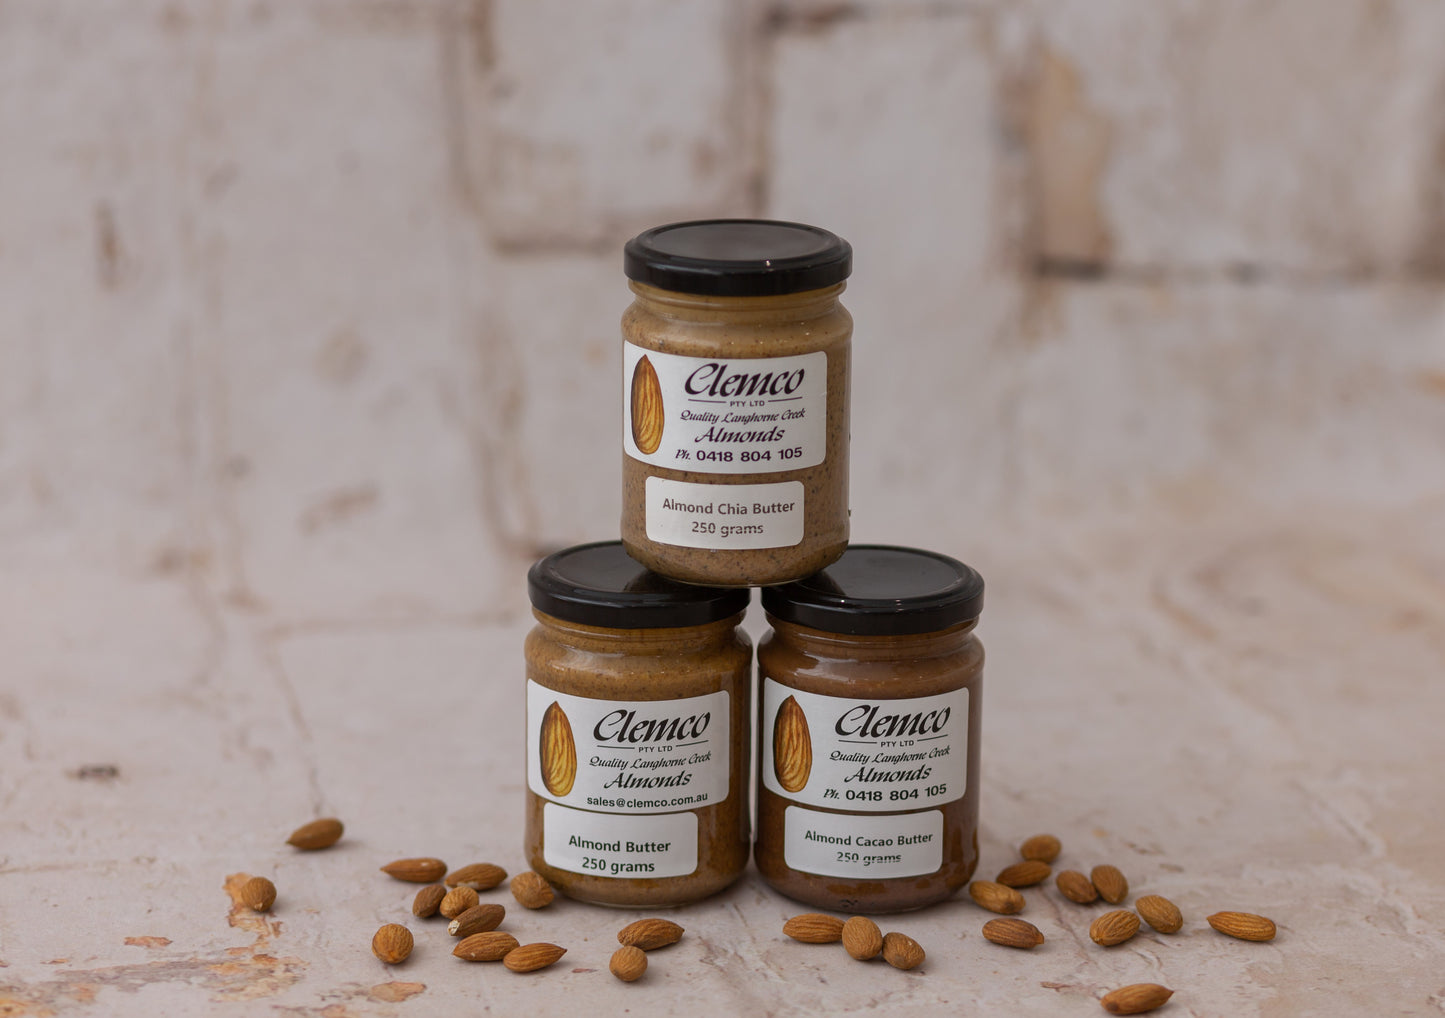 Almond Cacao Butter